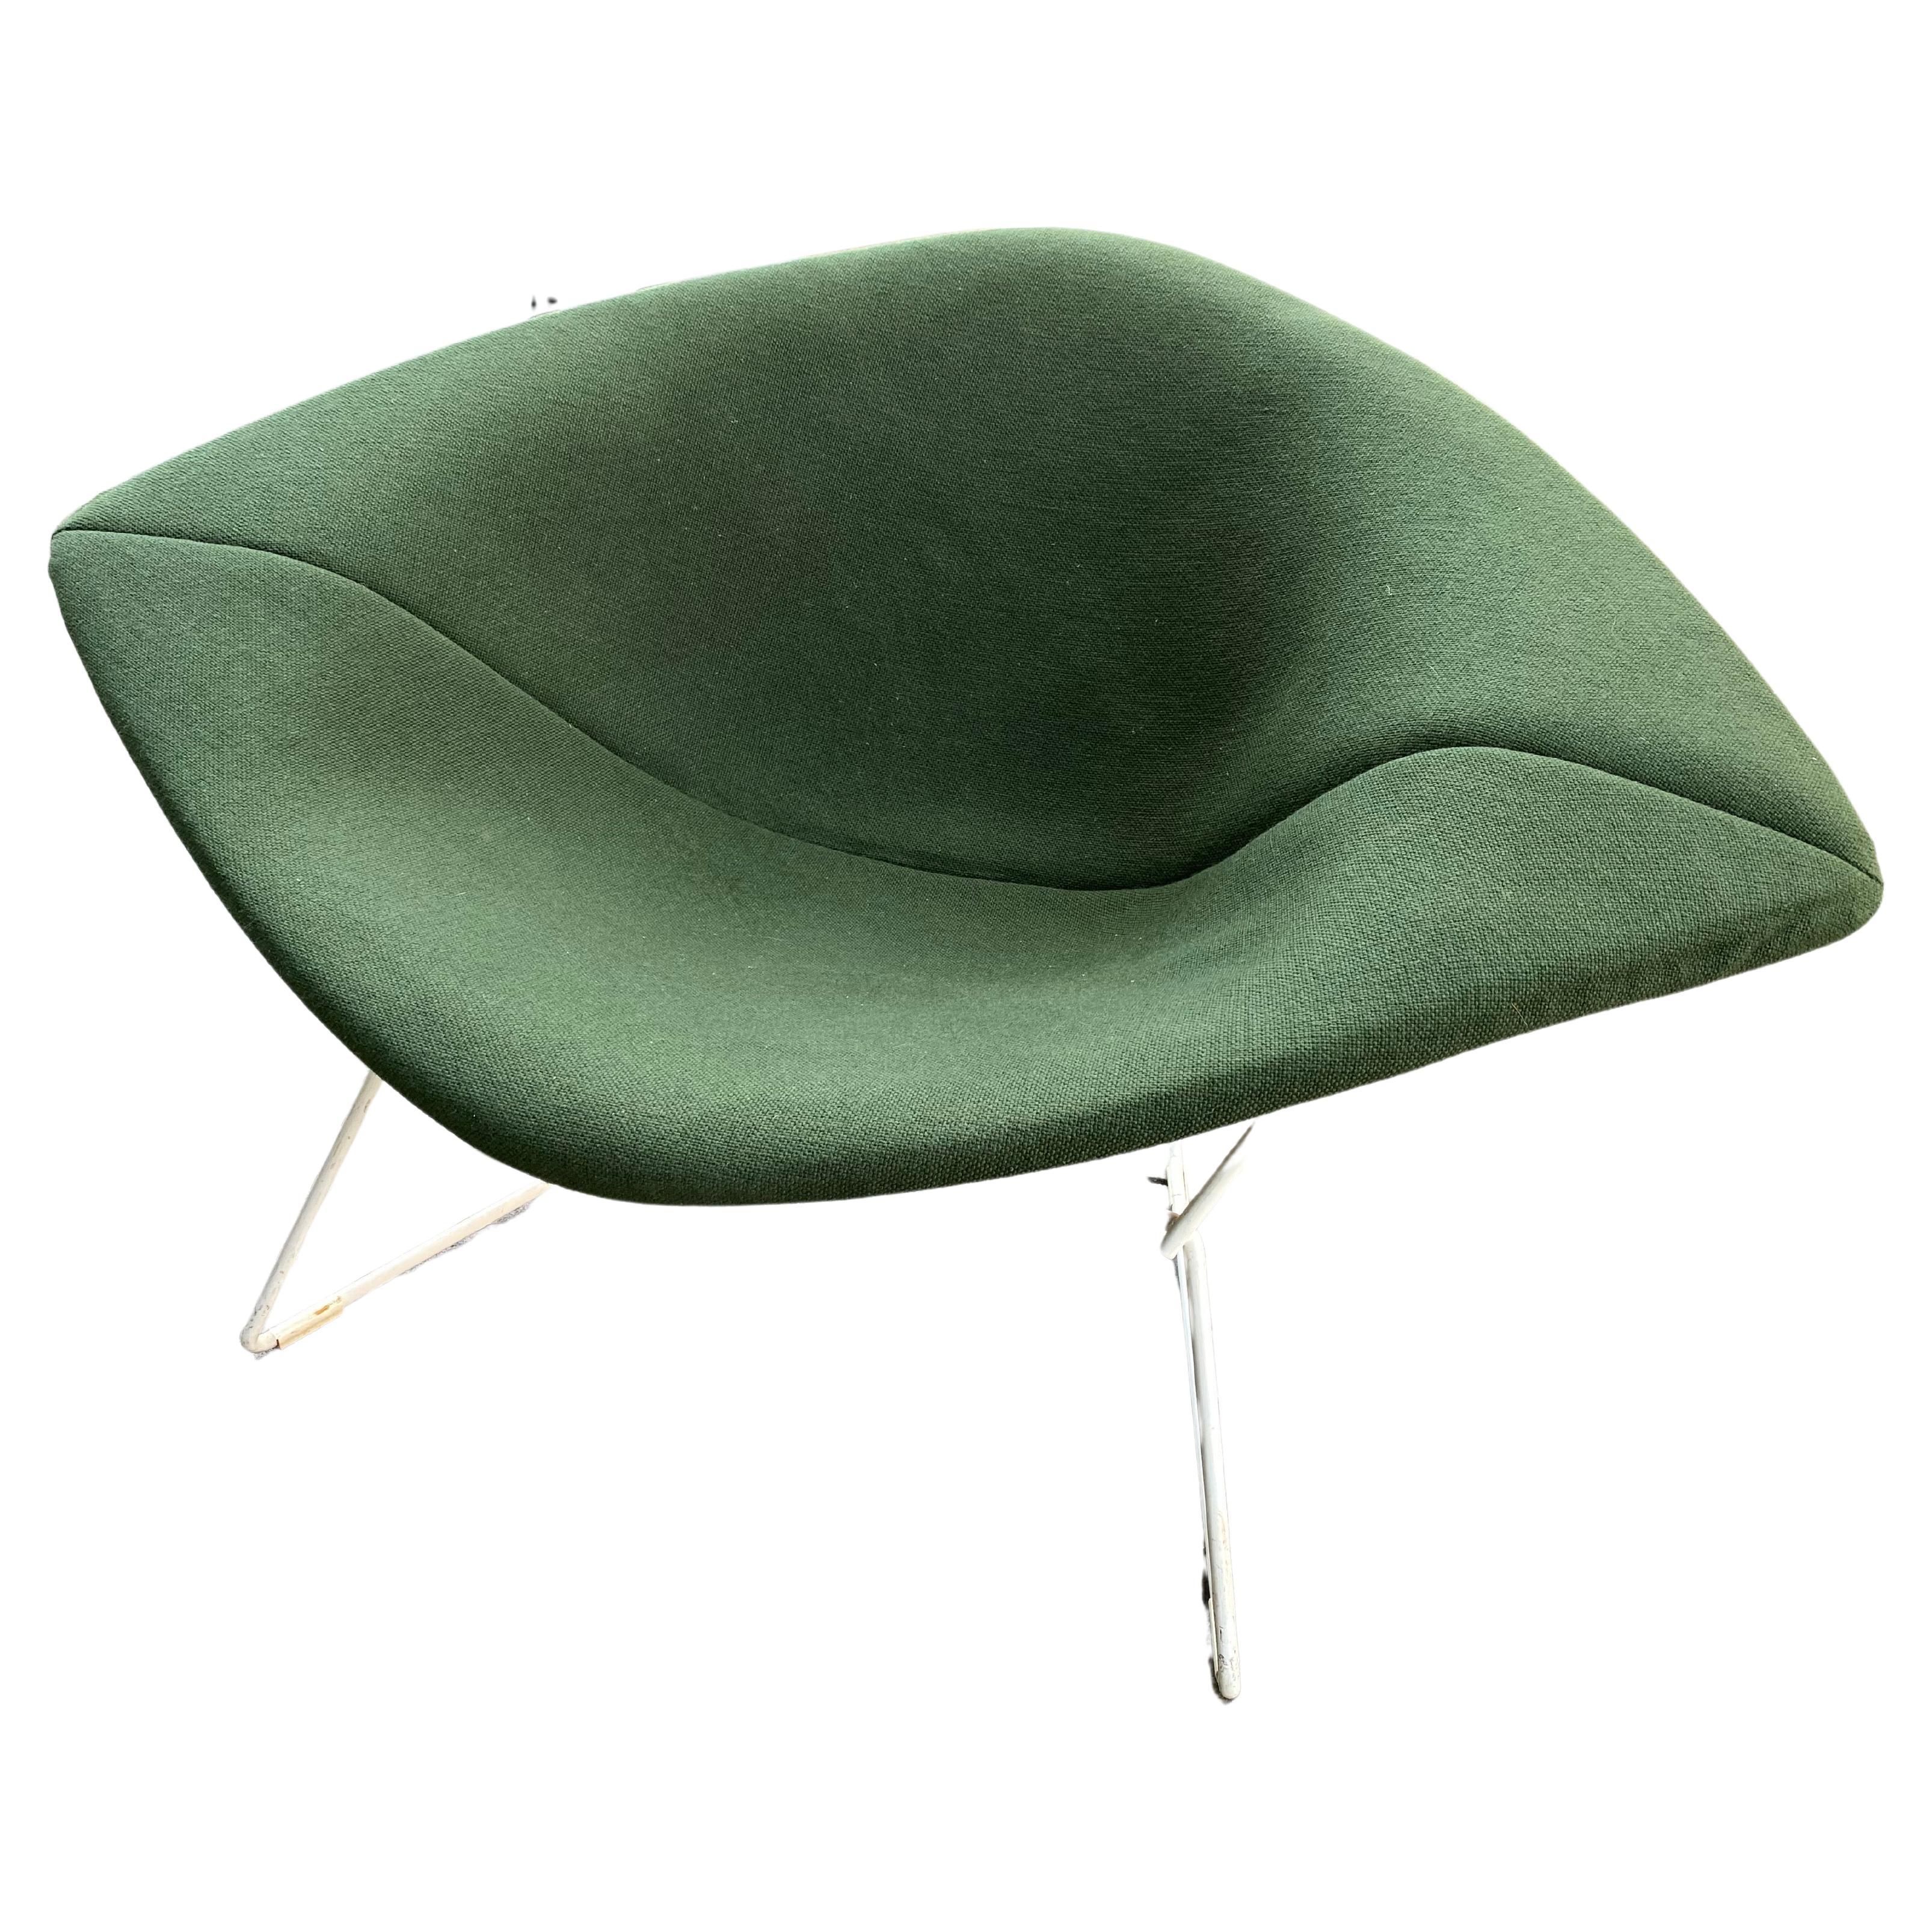 Harry Bertoia for Knoll large diamond chair with a green cover. Base is original white. Bushings are in good shape, and overall the cover is pretty clean! Foam is still soft! Crazy comfortable, big and roomy!